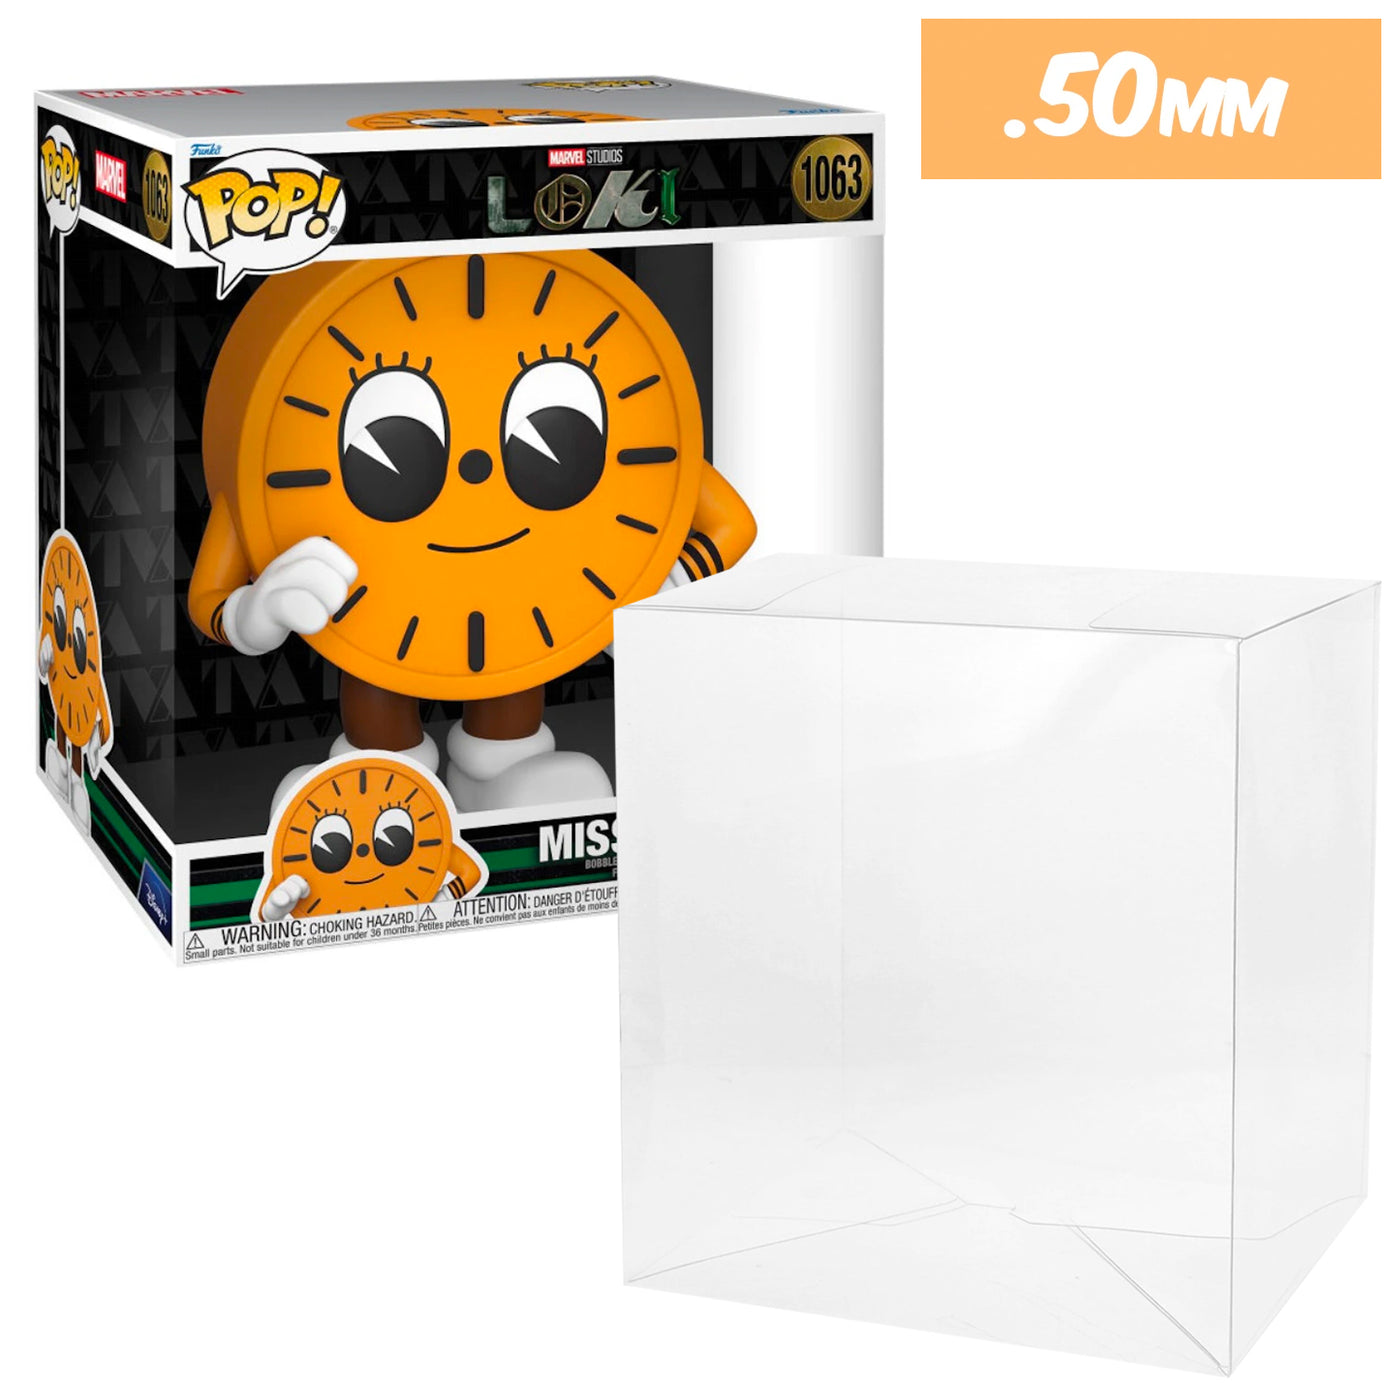 10 inch wide new size miss minutes sdcc best funko pop protectors thick strong uv scratch flat top stack vinyl display geek plastic shield vaulted eco armor fits collect protect display case kollector protector